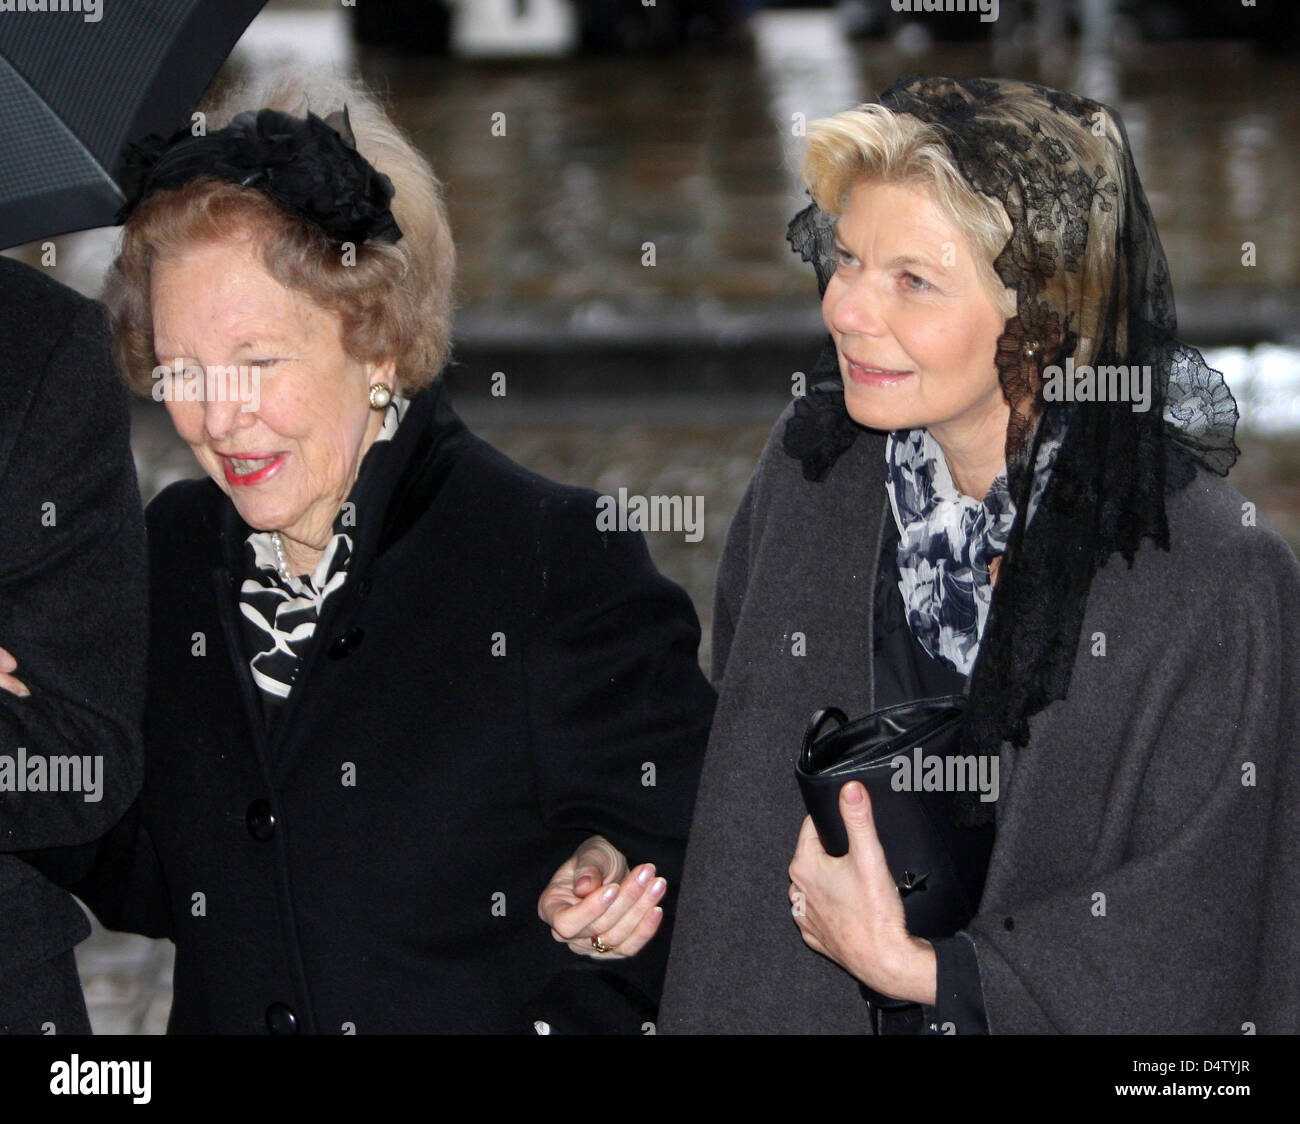 Princess Marie-Astrid of Luxembourg attends the funeral ceremony for Prince Alexander of Belgium in Laken, Belgium, 04 December 2009. Prince Alexander died on 29 November 2009. He was the half-brother of King Albert II of Belgium. Photo: Albert Nieboer (NETHERLANDS OUT) Stock Photo